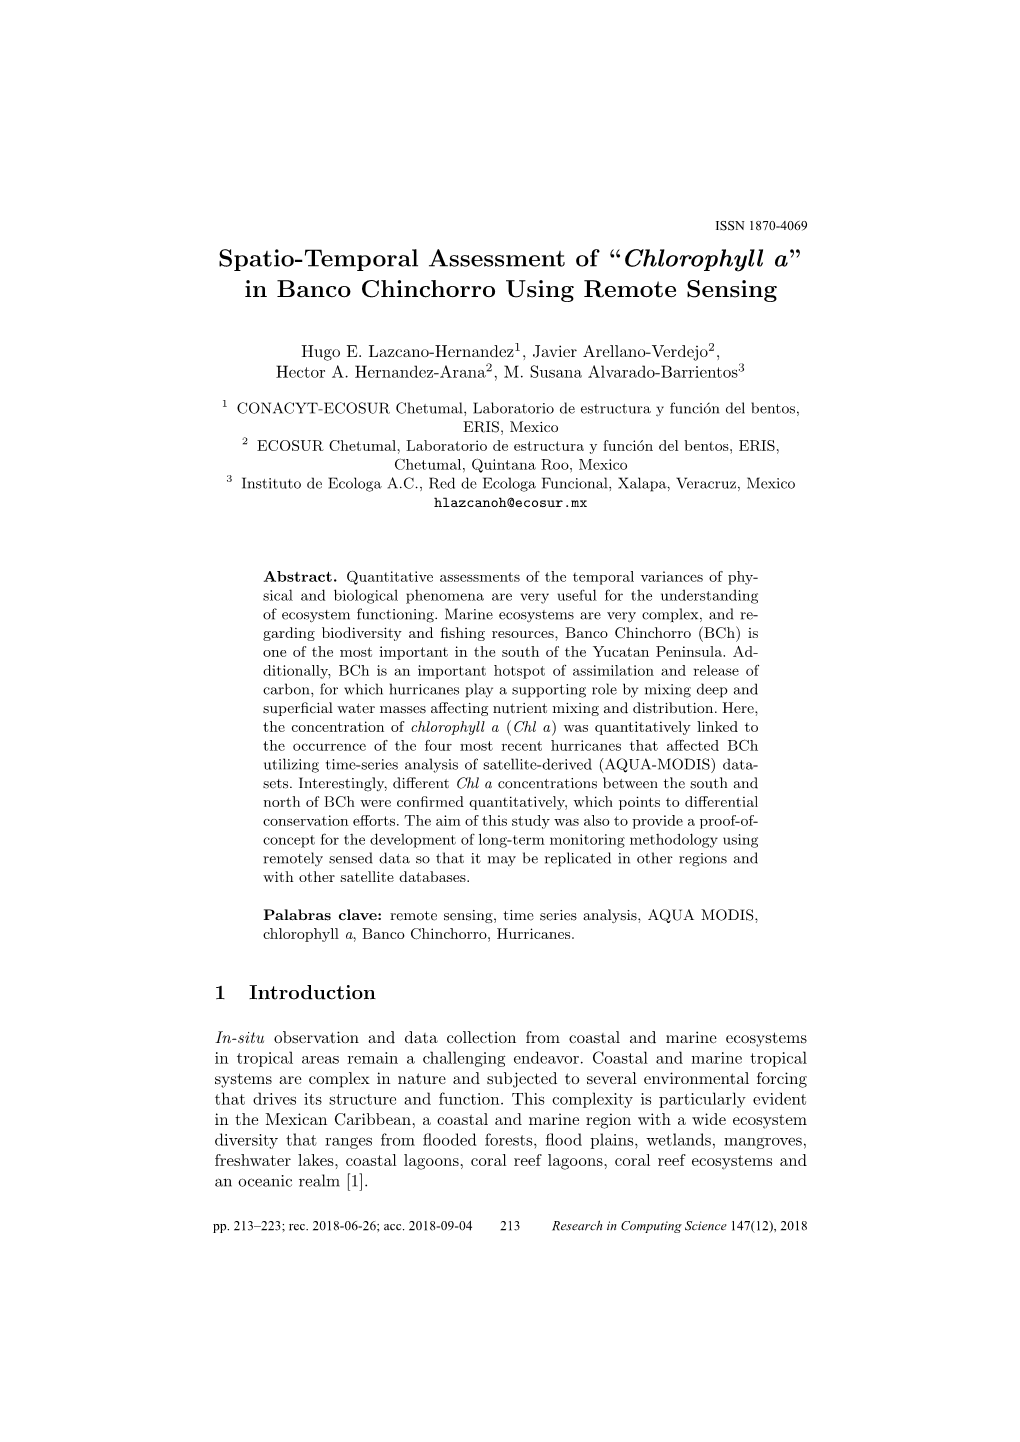 Spatio-Temporal Assessment of "Chlorophyll A" in Banco Chinchorro Using Remote Sensing